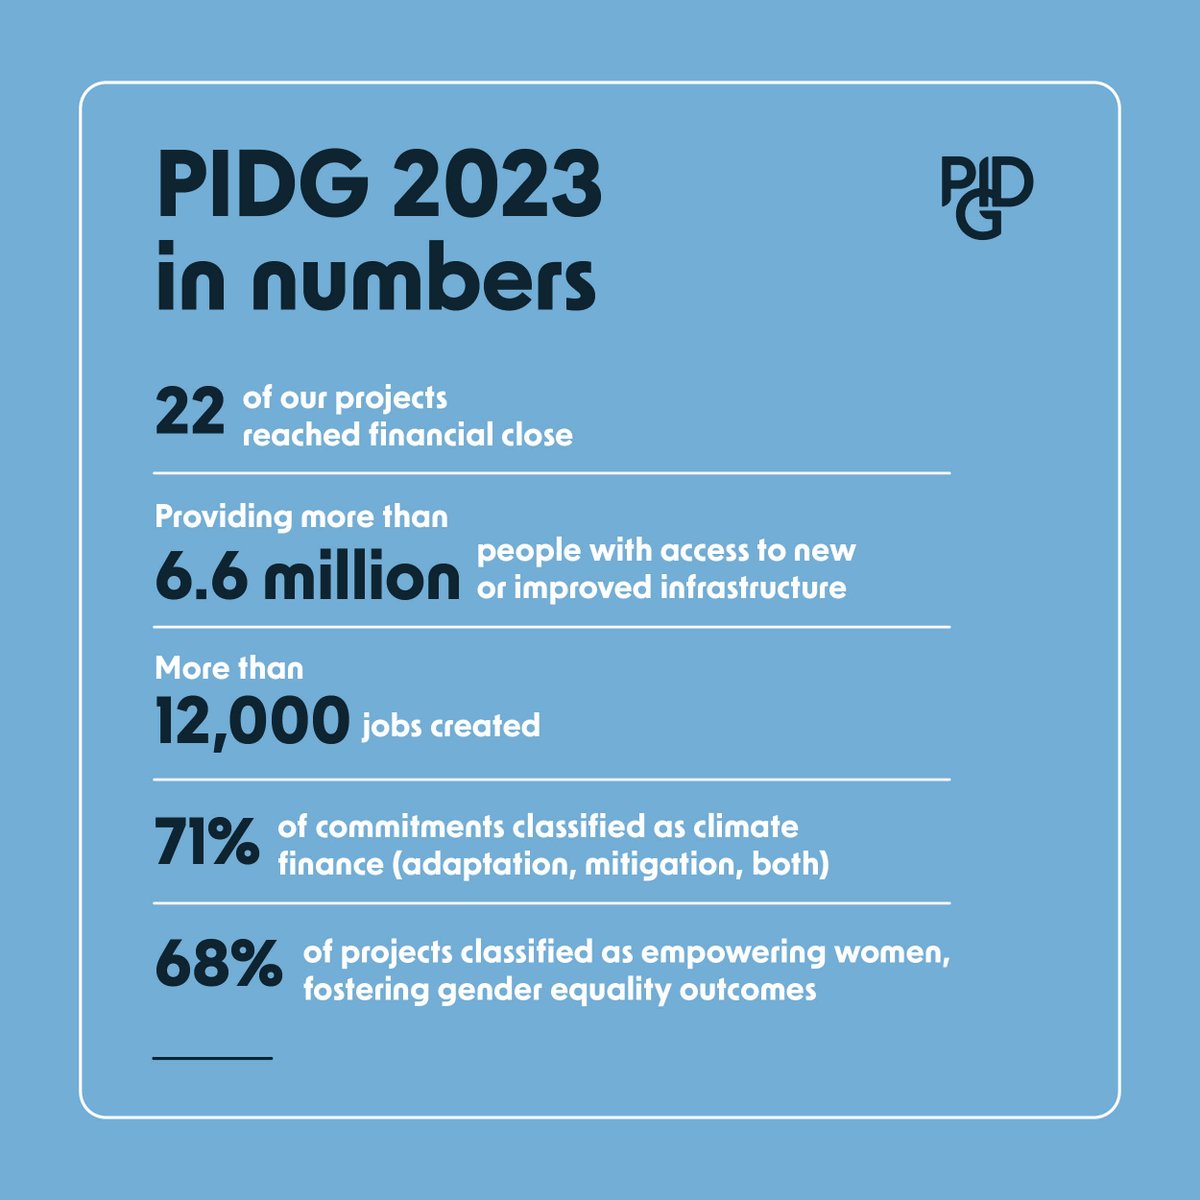 2023 was a record year for the Private Infrastructure Development Group. Find our more about PIDG's investments, projects reaching financial close, climate impact, and more. @InfracoAfrica @InfraCoAsia @GuarantCo